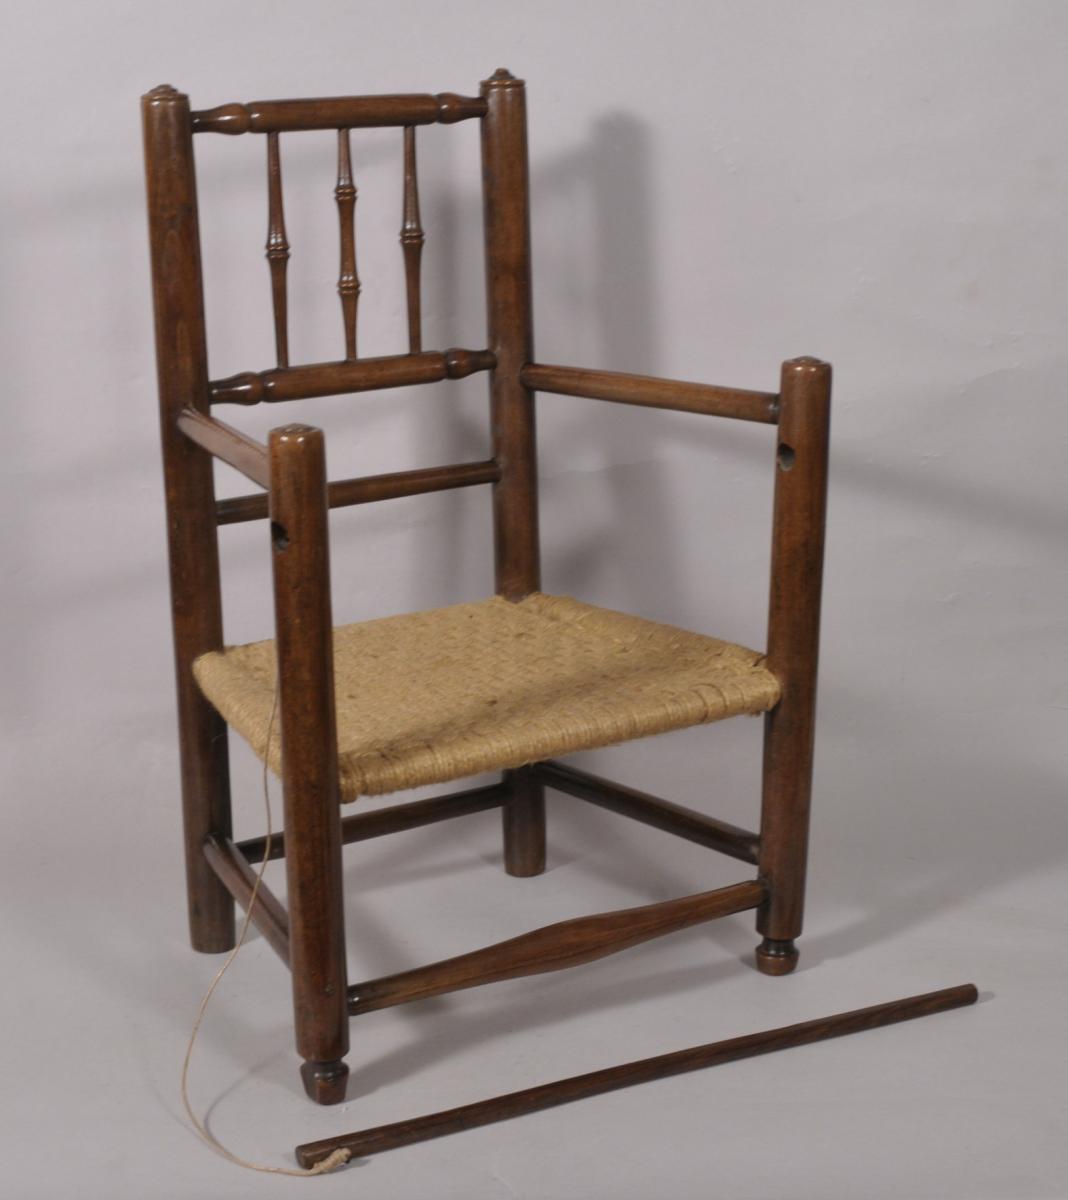 S/5870 Antique Early 19th Century Cherry Wood Child's Armchair